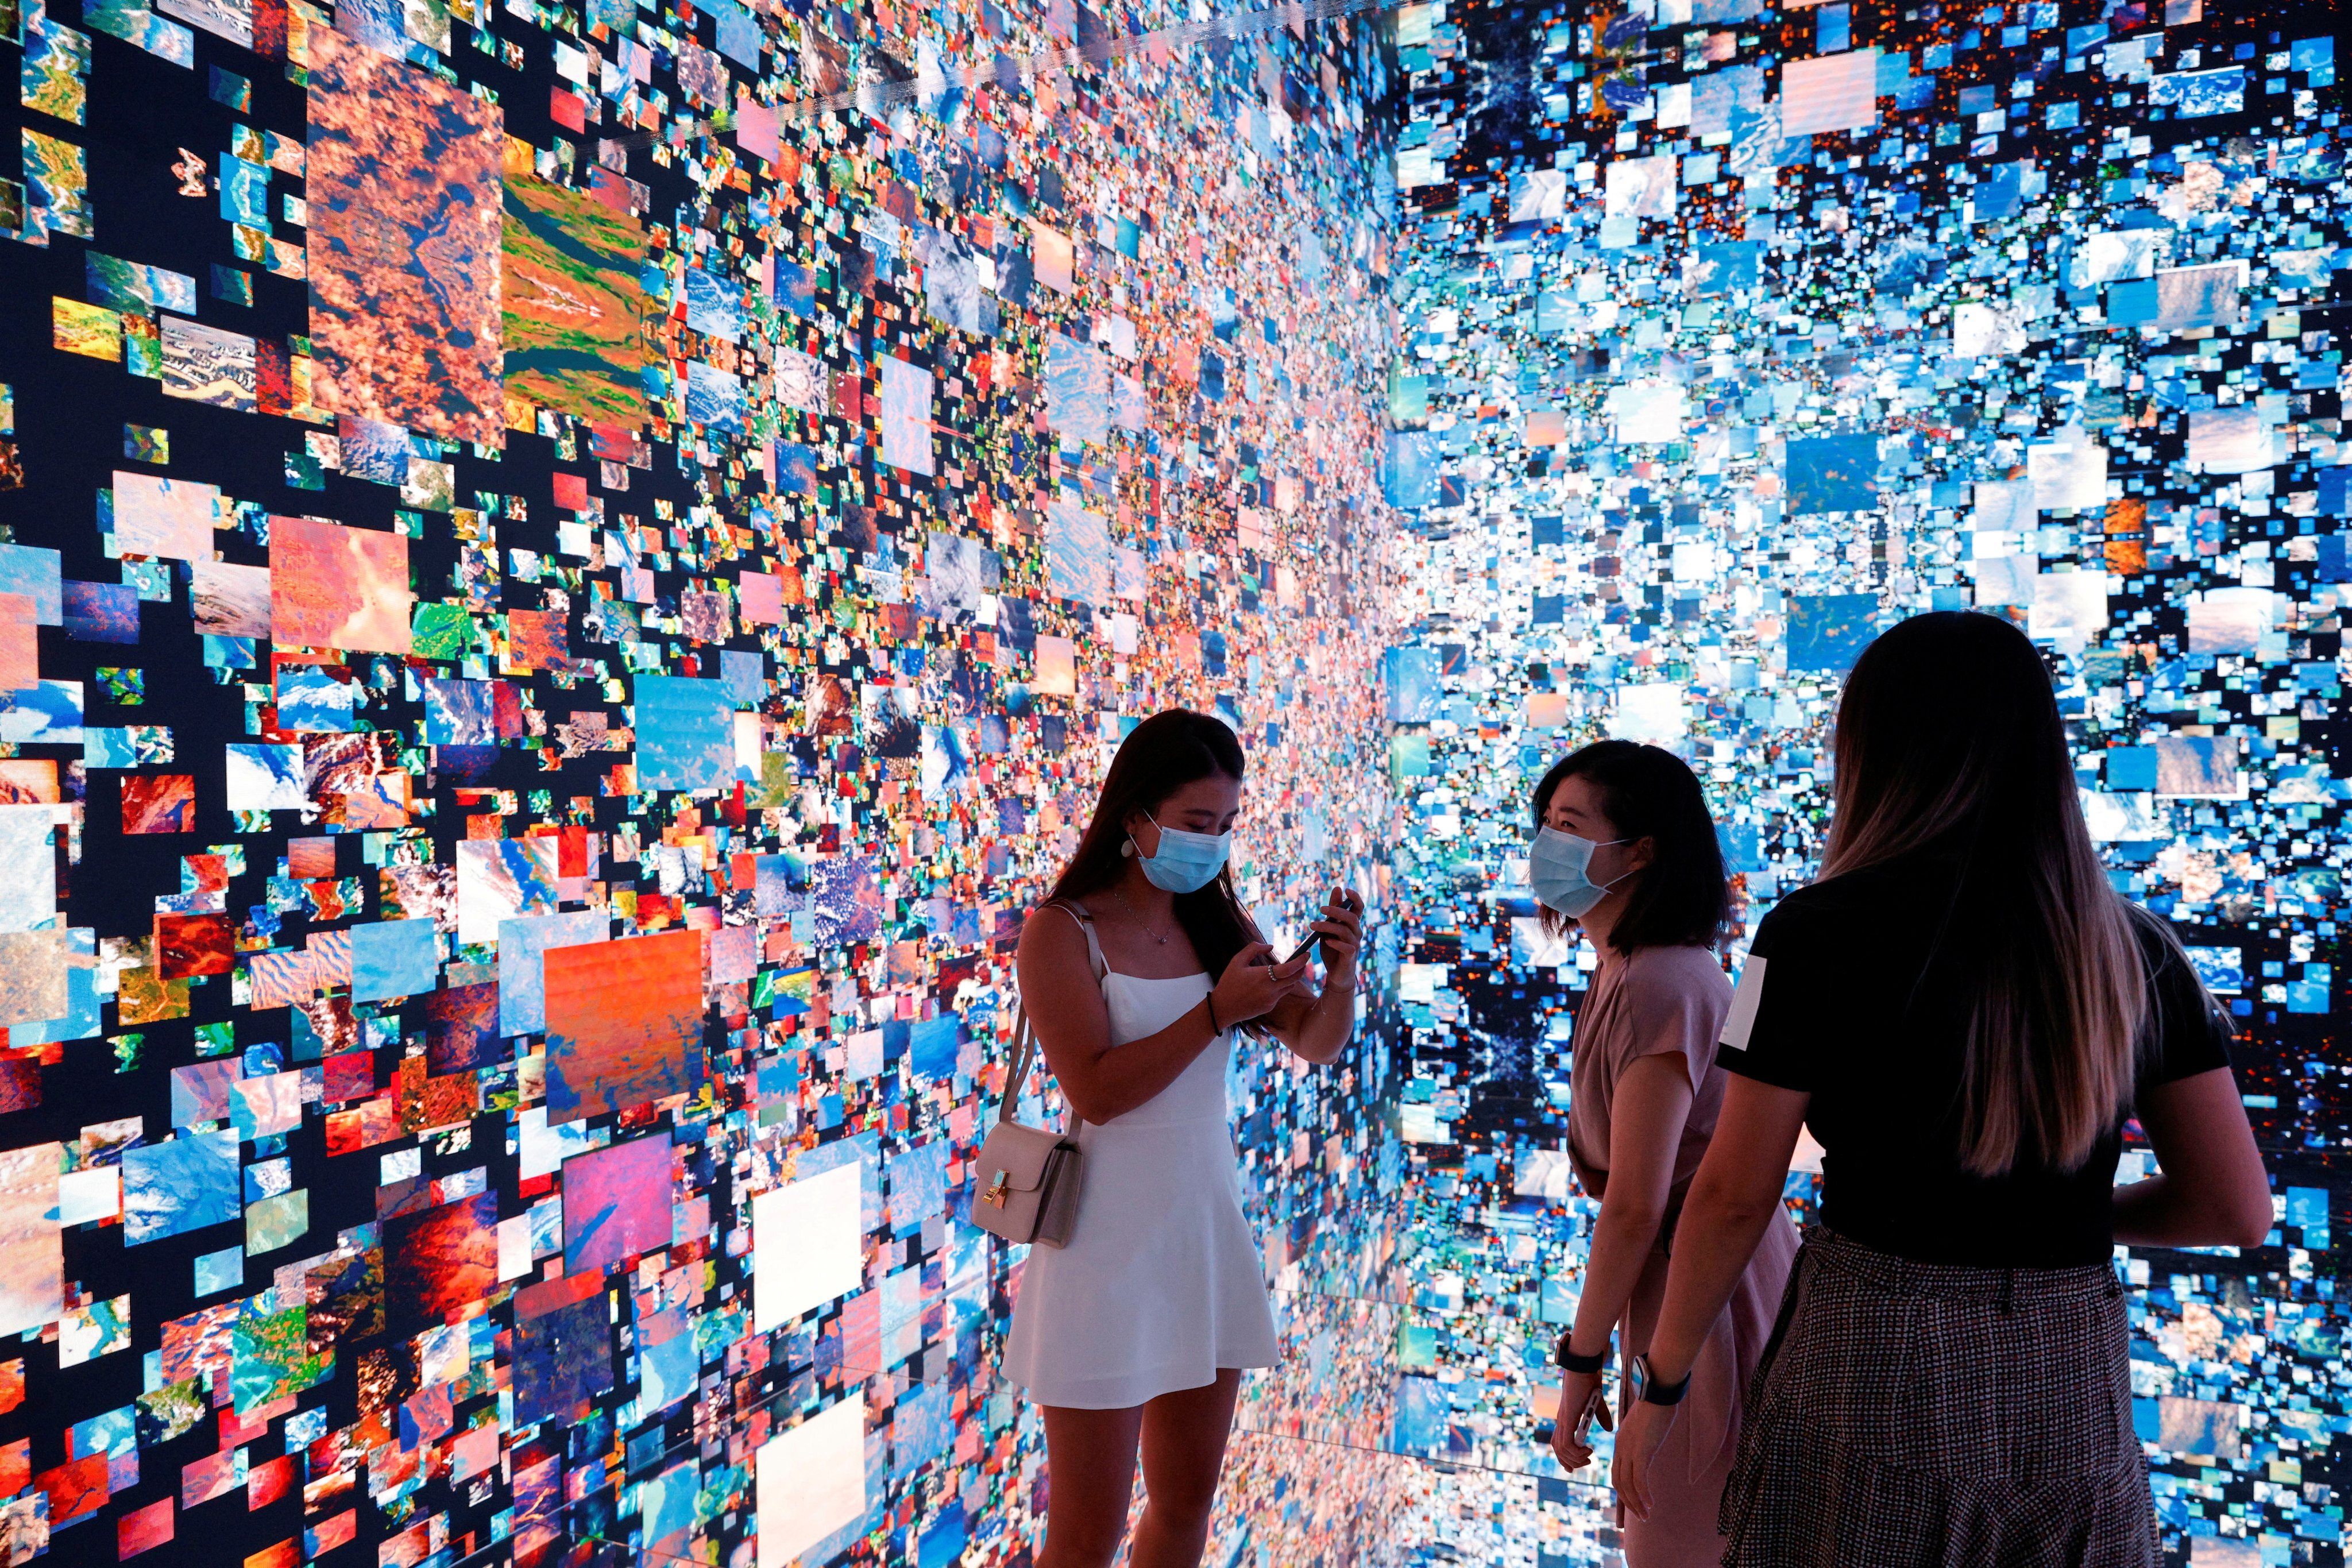 Visitors are seen at an immersive art installation titled “Machine Hallucinations — Space: Metaverse” by media artist Refik Anadol, which was converted into an NFT and auctioned online at Sotheby’s, at the Digital Art Fair in Hong Kong on September 30. Photo: Reuters